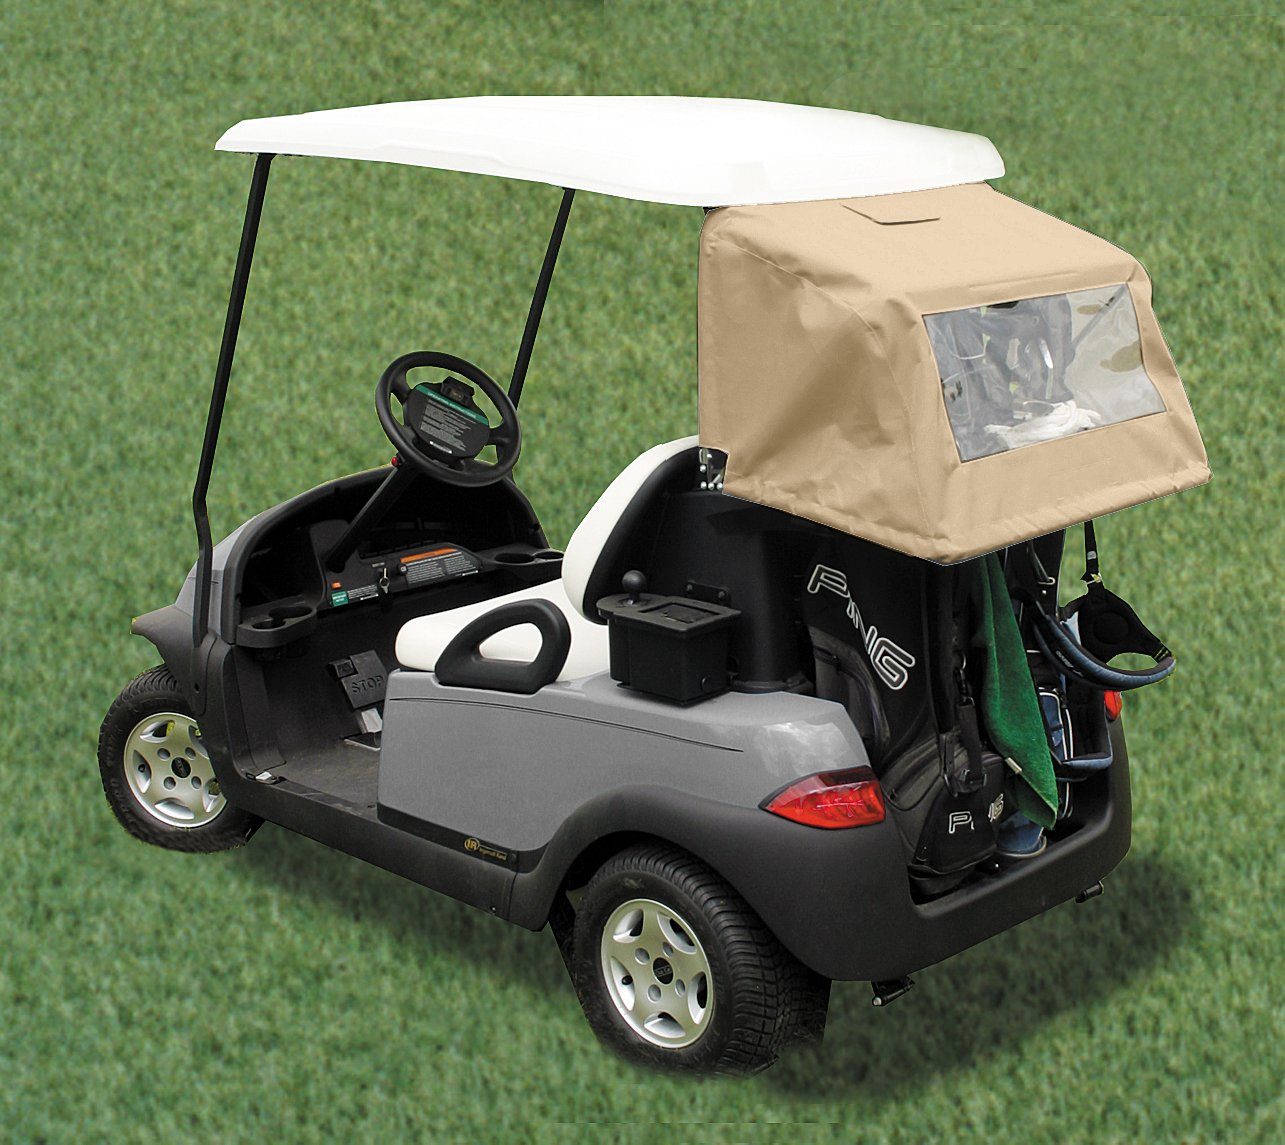 Accessory - DryClub Canopy. Protect Your Clubs.